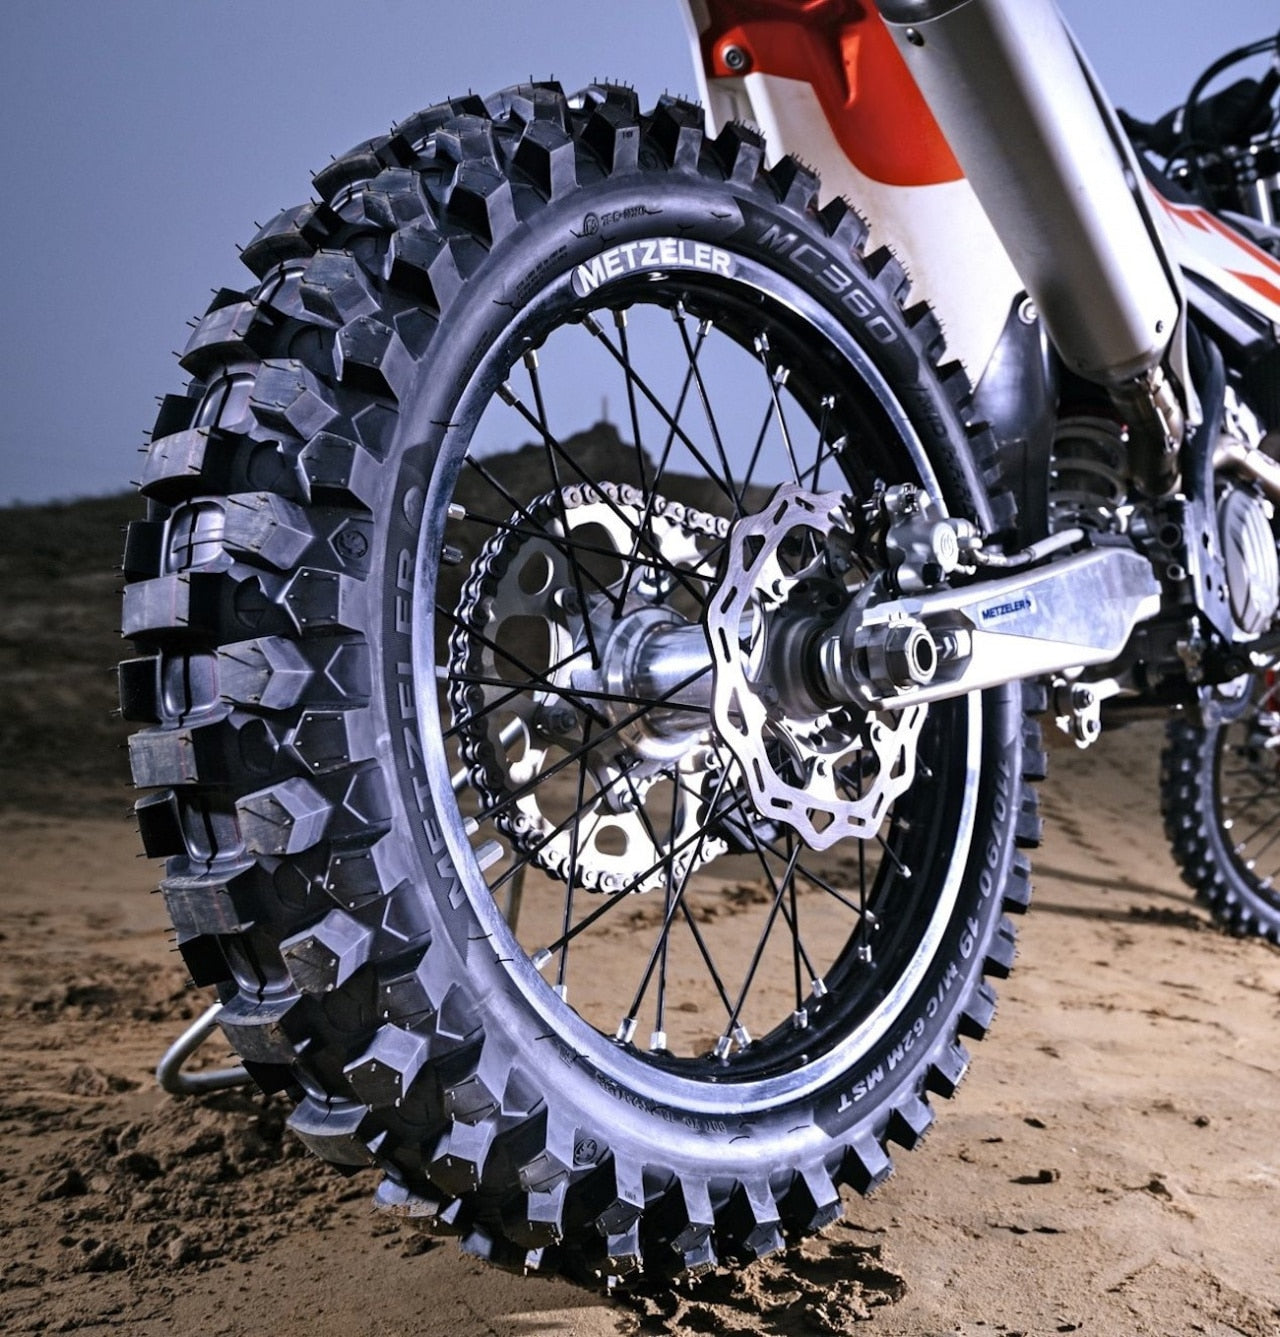 Dirt bike tire on a ktm dirt bike. it appears to be a brand new offroad tire with deep aggressive nobbies for conquering off-road terrain